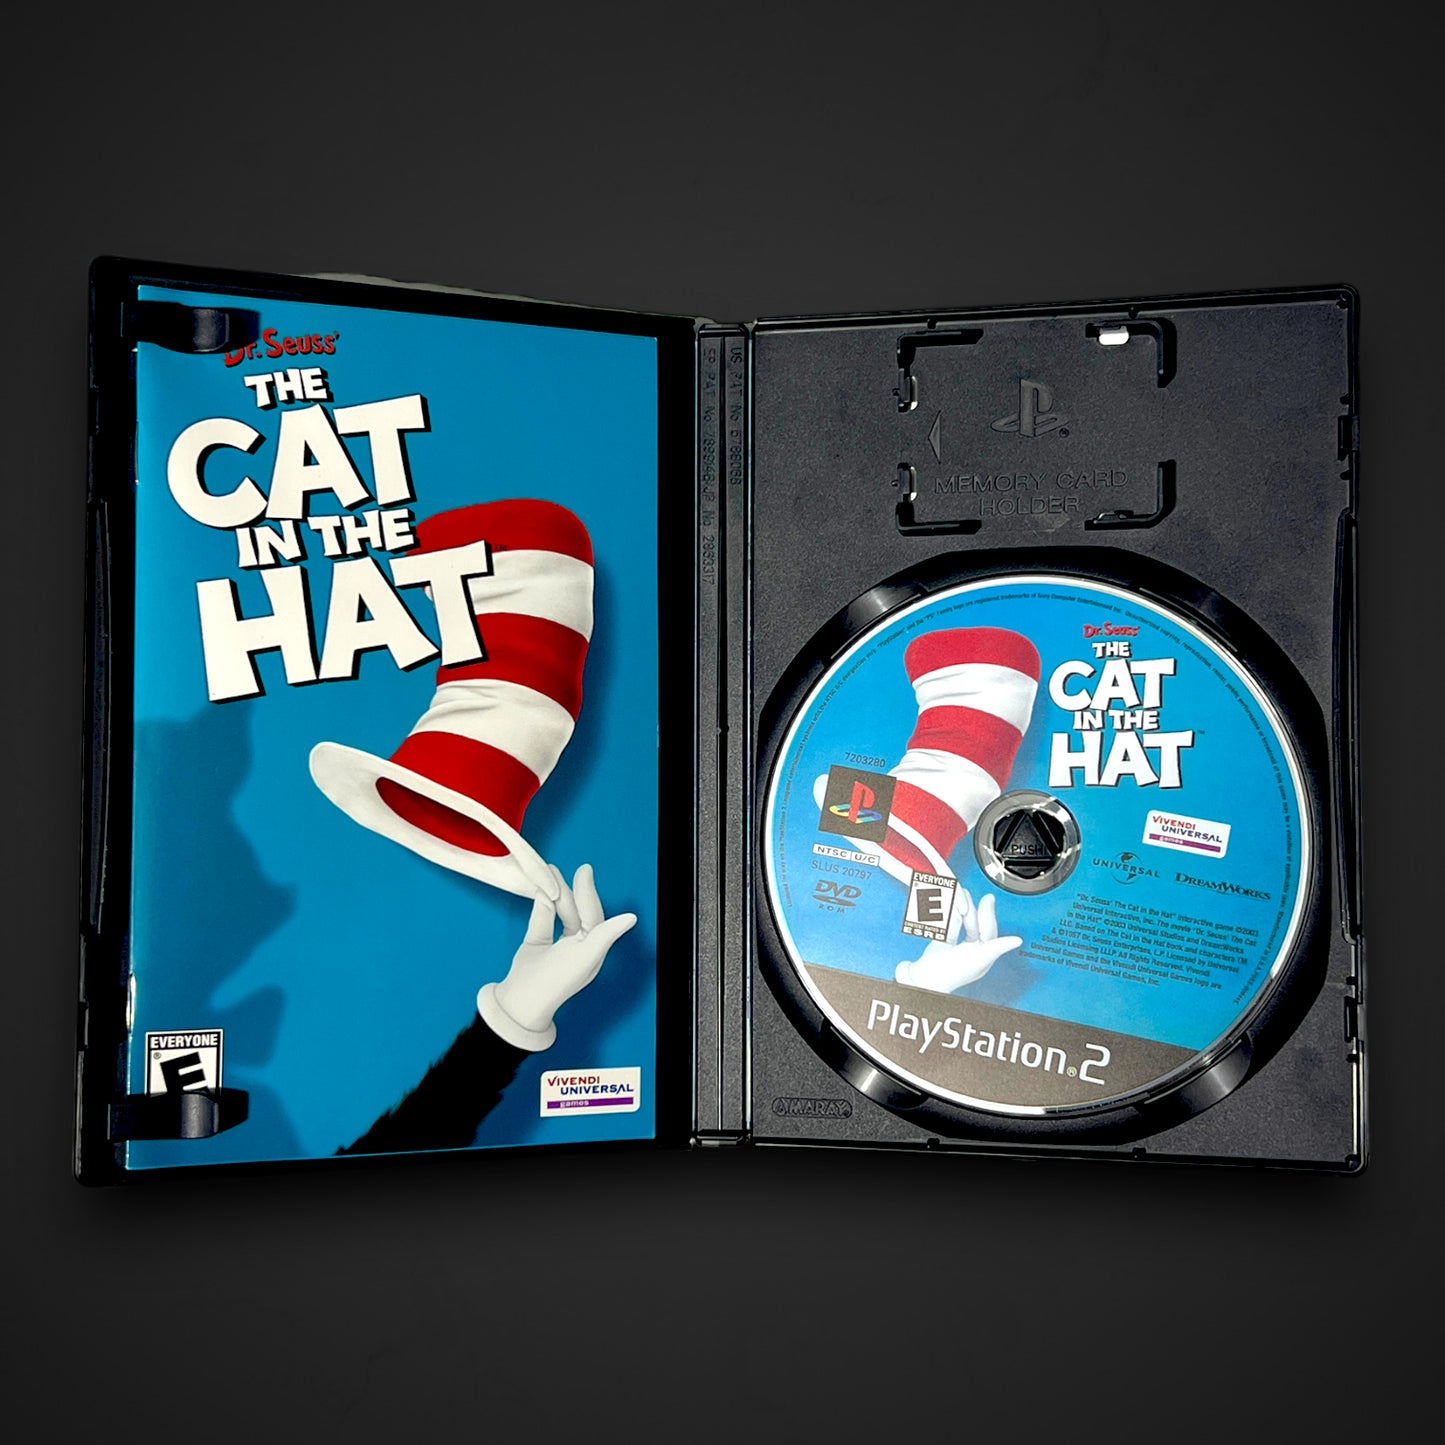 Dr. Seuss' The Cat in the Hat (Sony PlayStation 2, 2003)